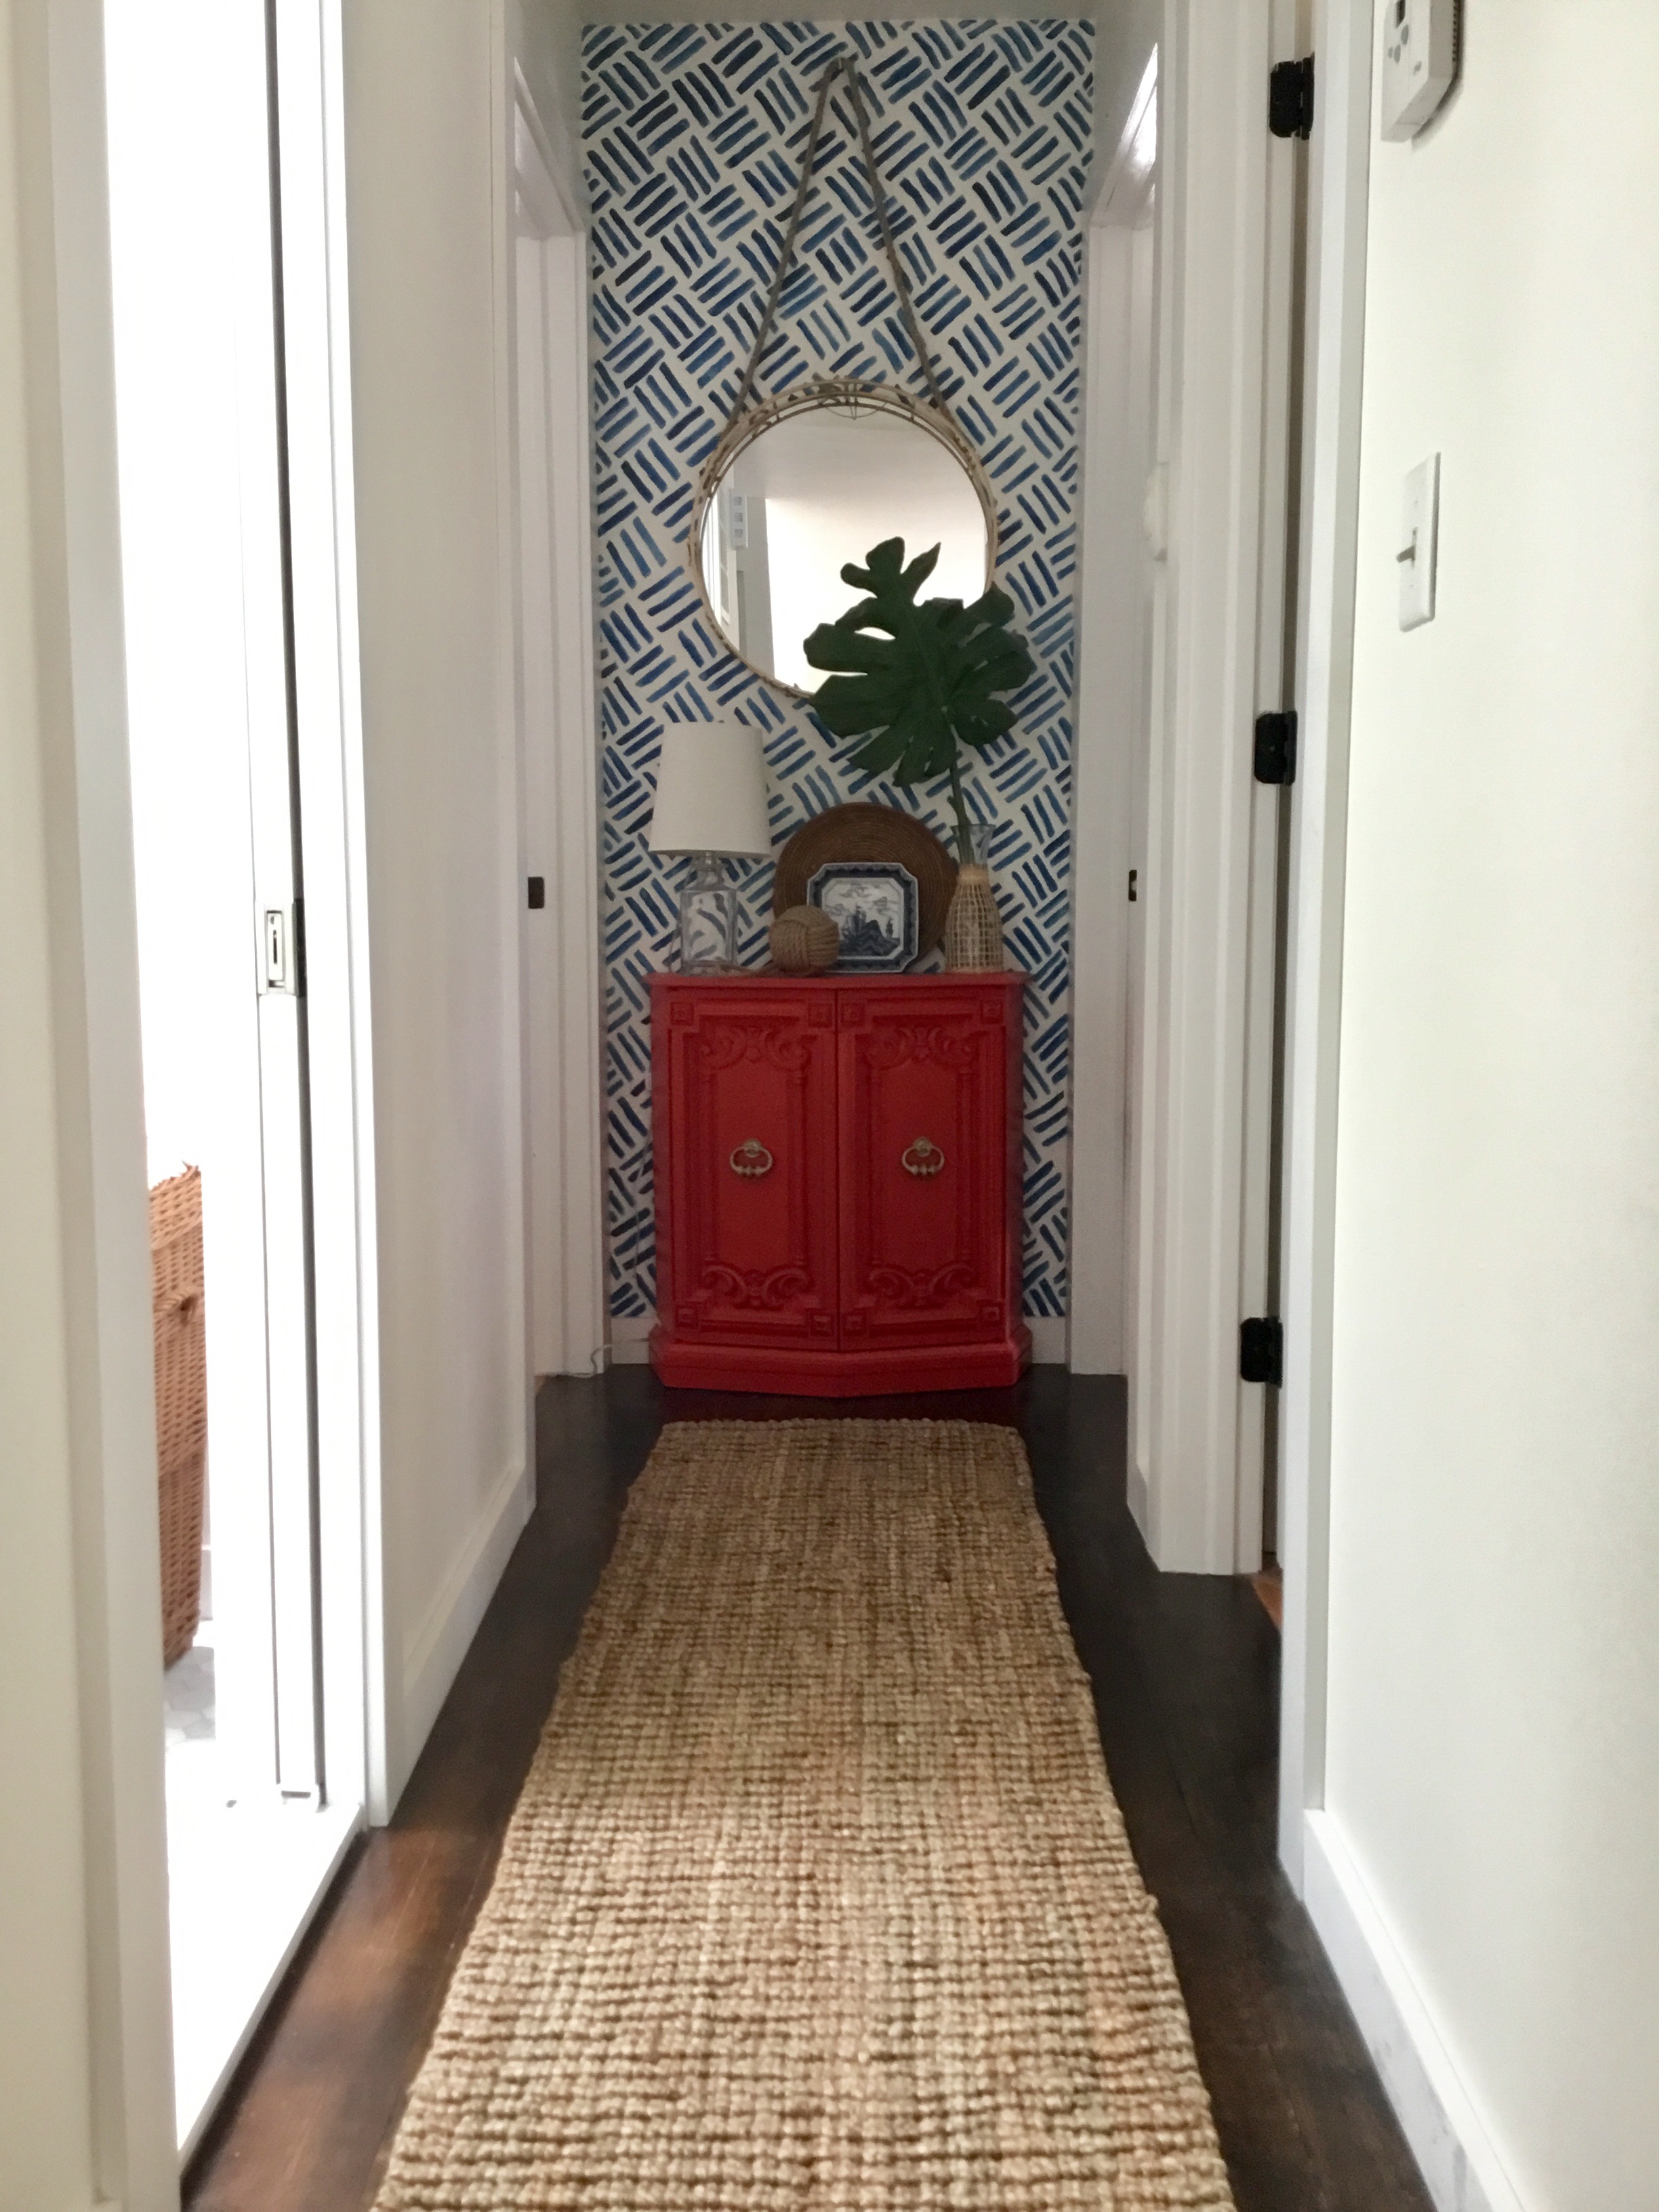 Hallway with hand painted blue and white accent wall, jute runner, coral stand with mirror and lamp